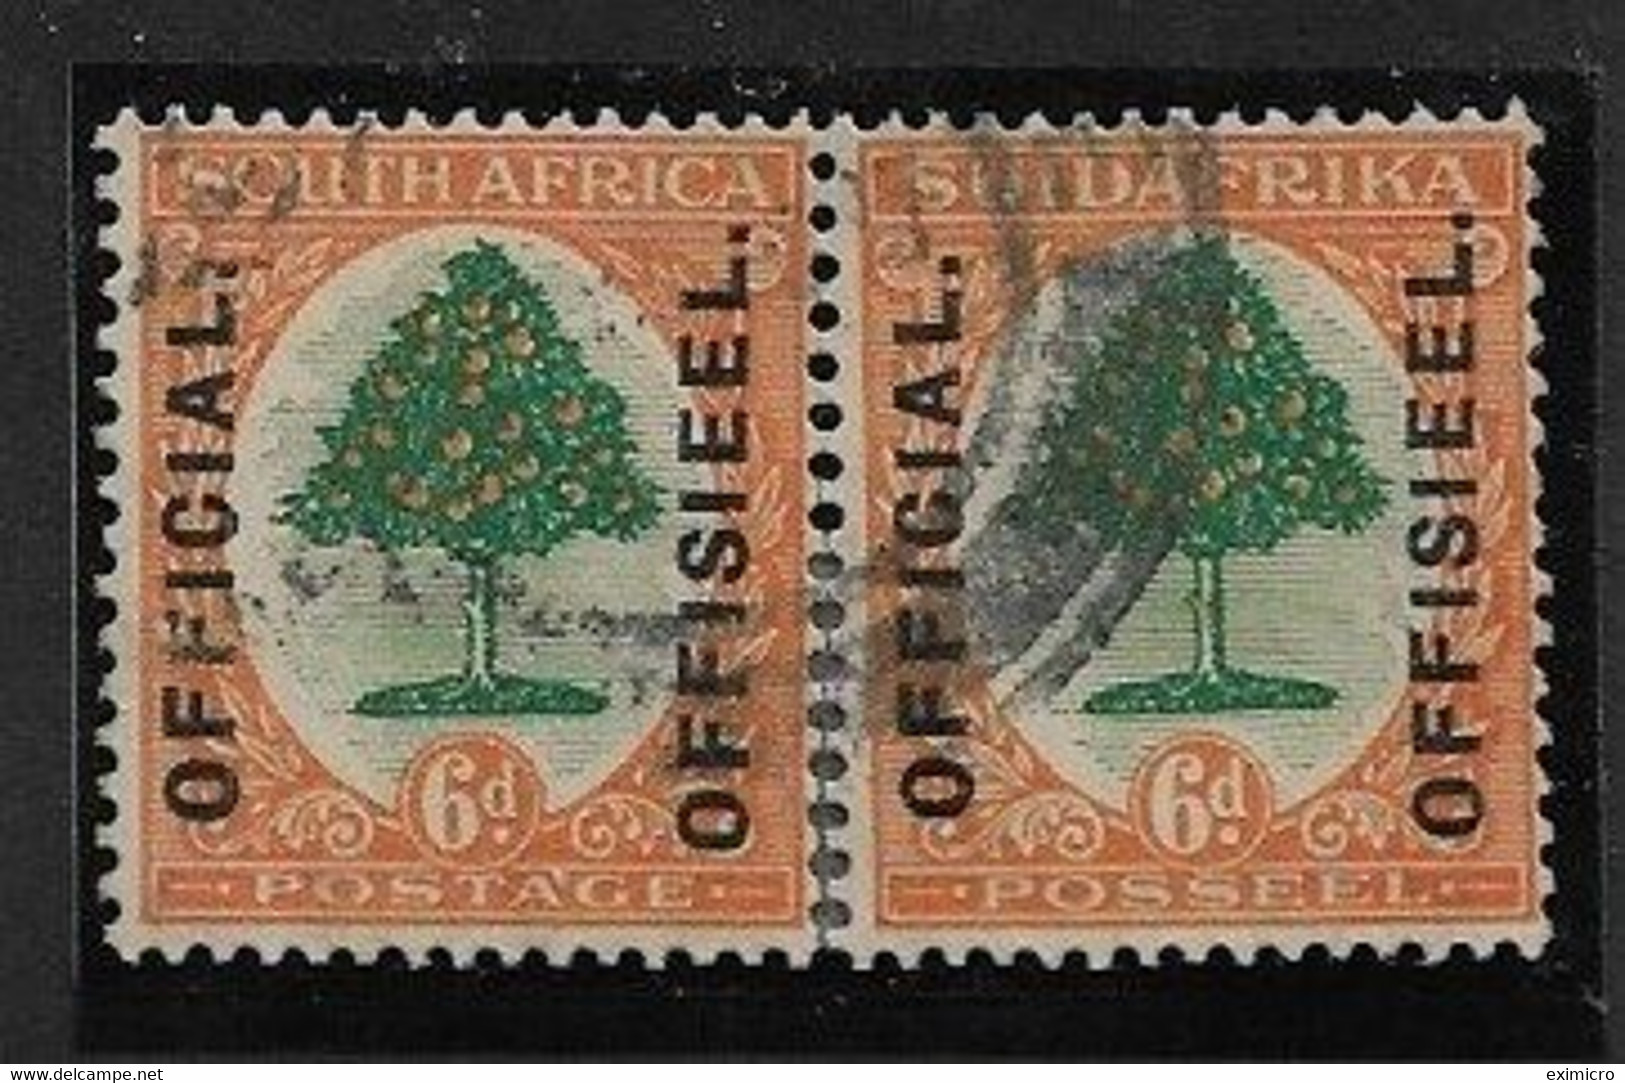 SOUTH AFRICA 1926 6d OFFICIAL BILINGUAL PAIR SG O4 FINE USED Cat £75 - Dienstmarken